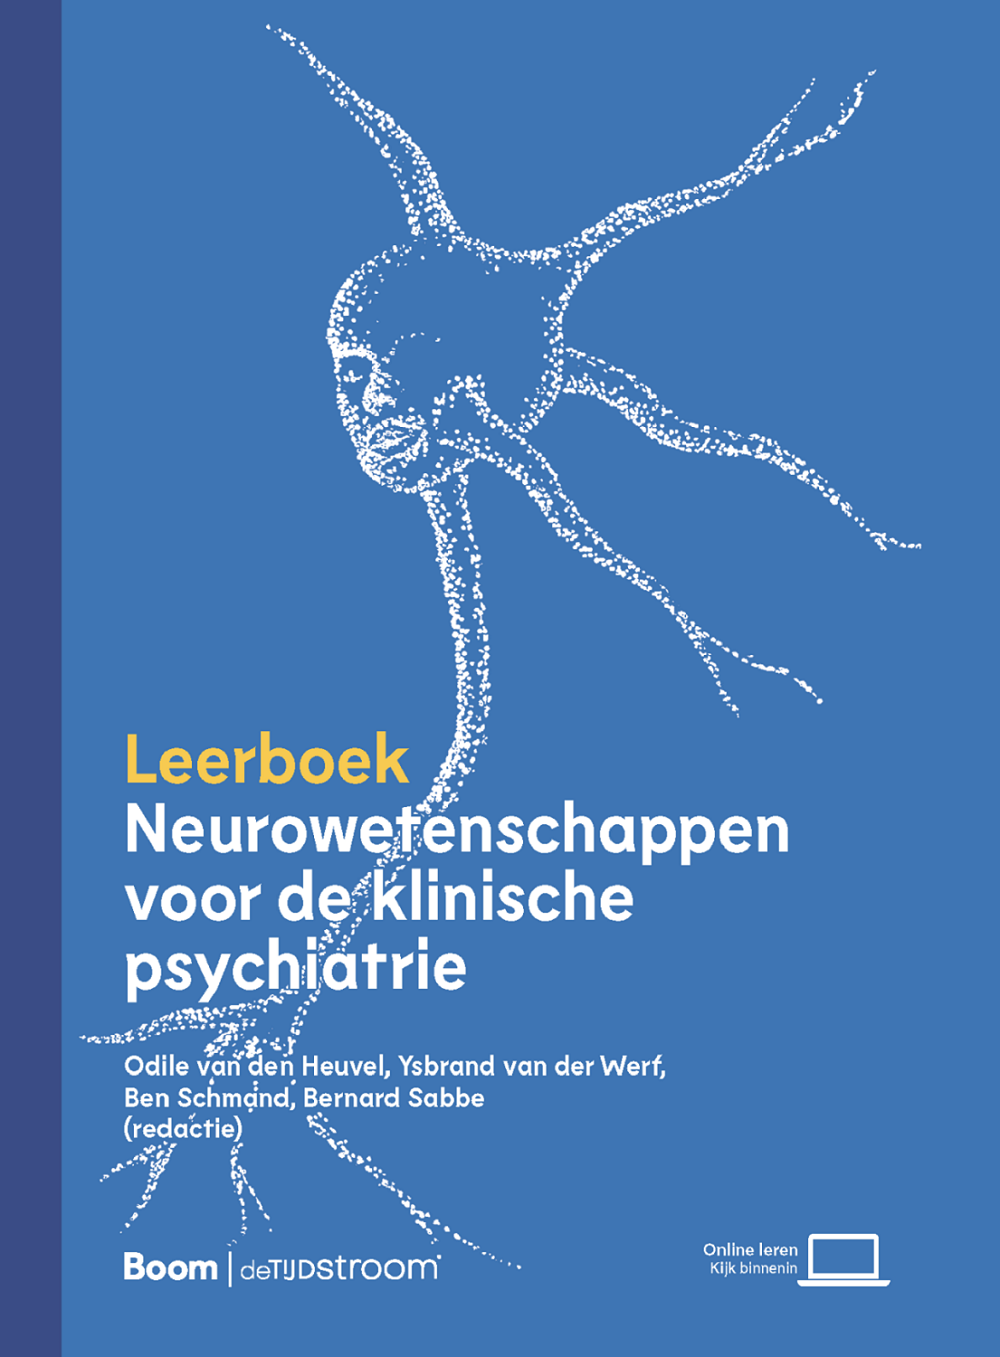 Cover textbook on Psychiatry